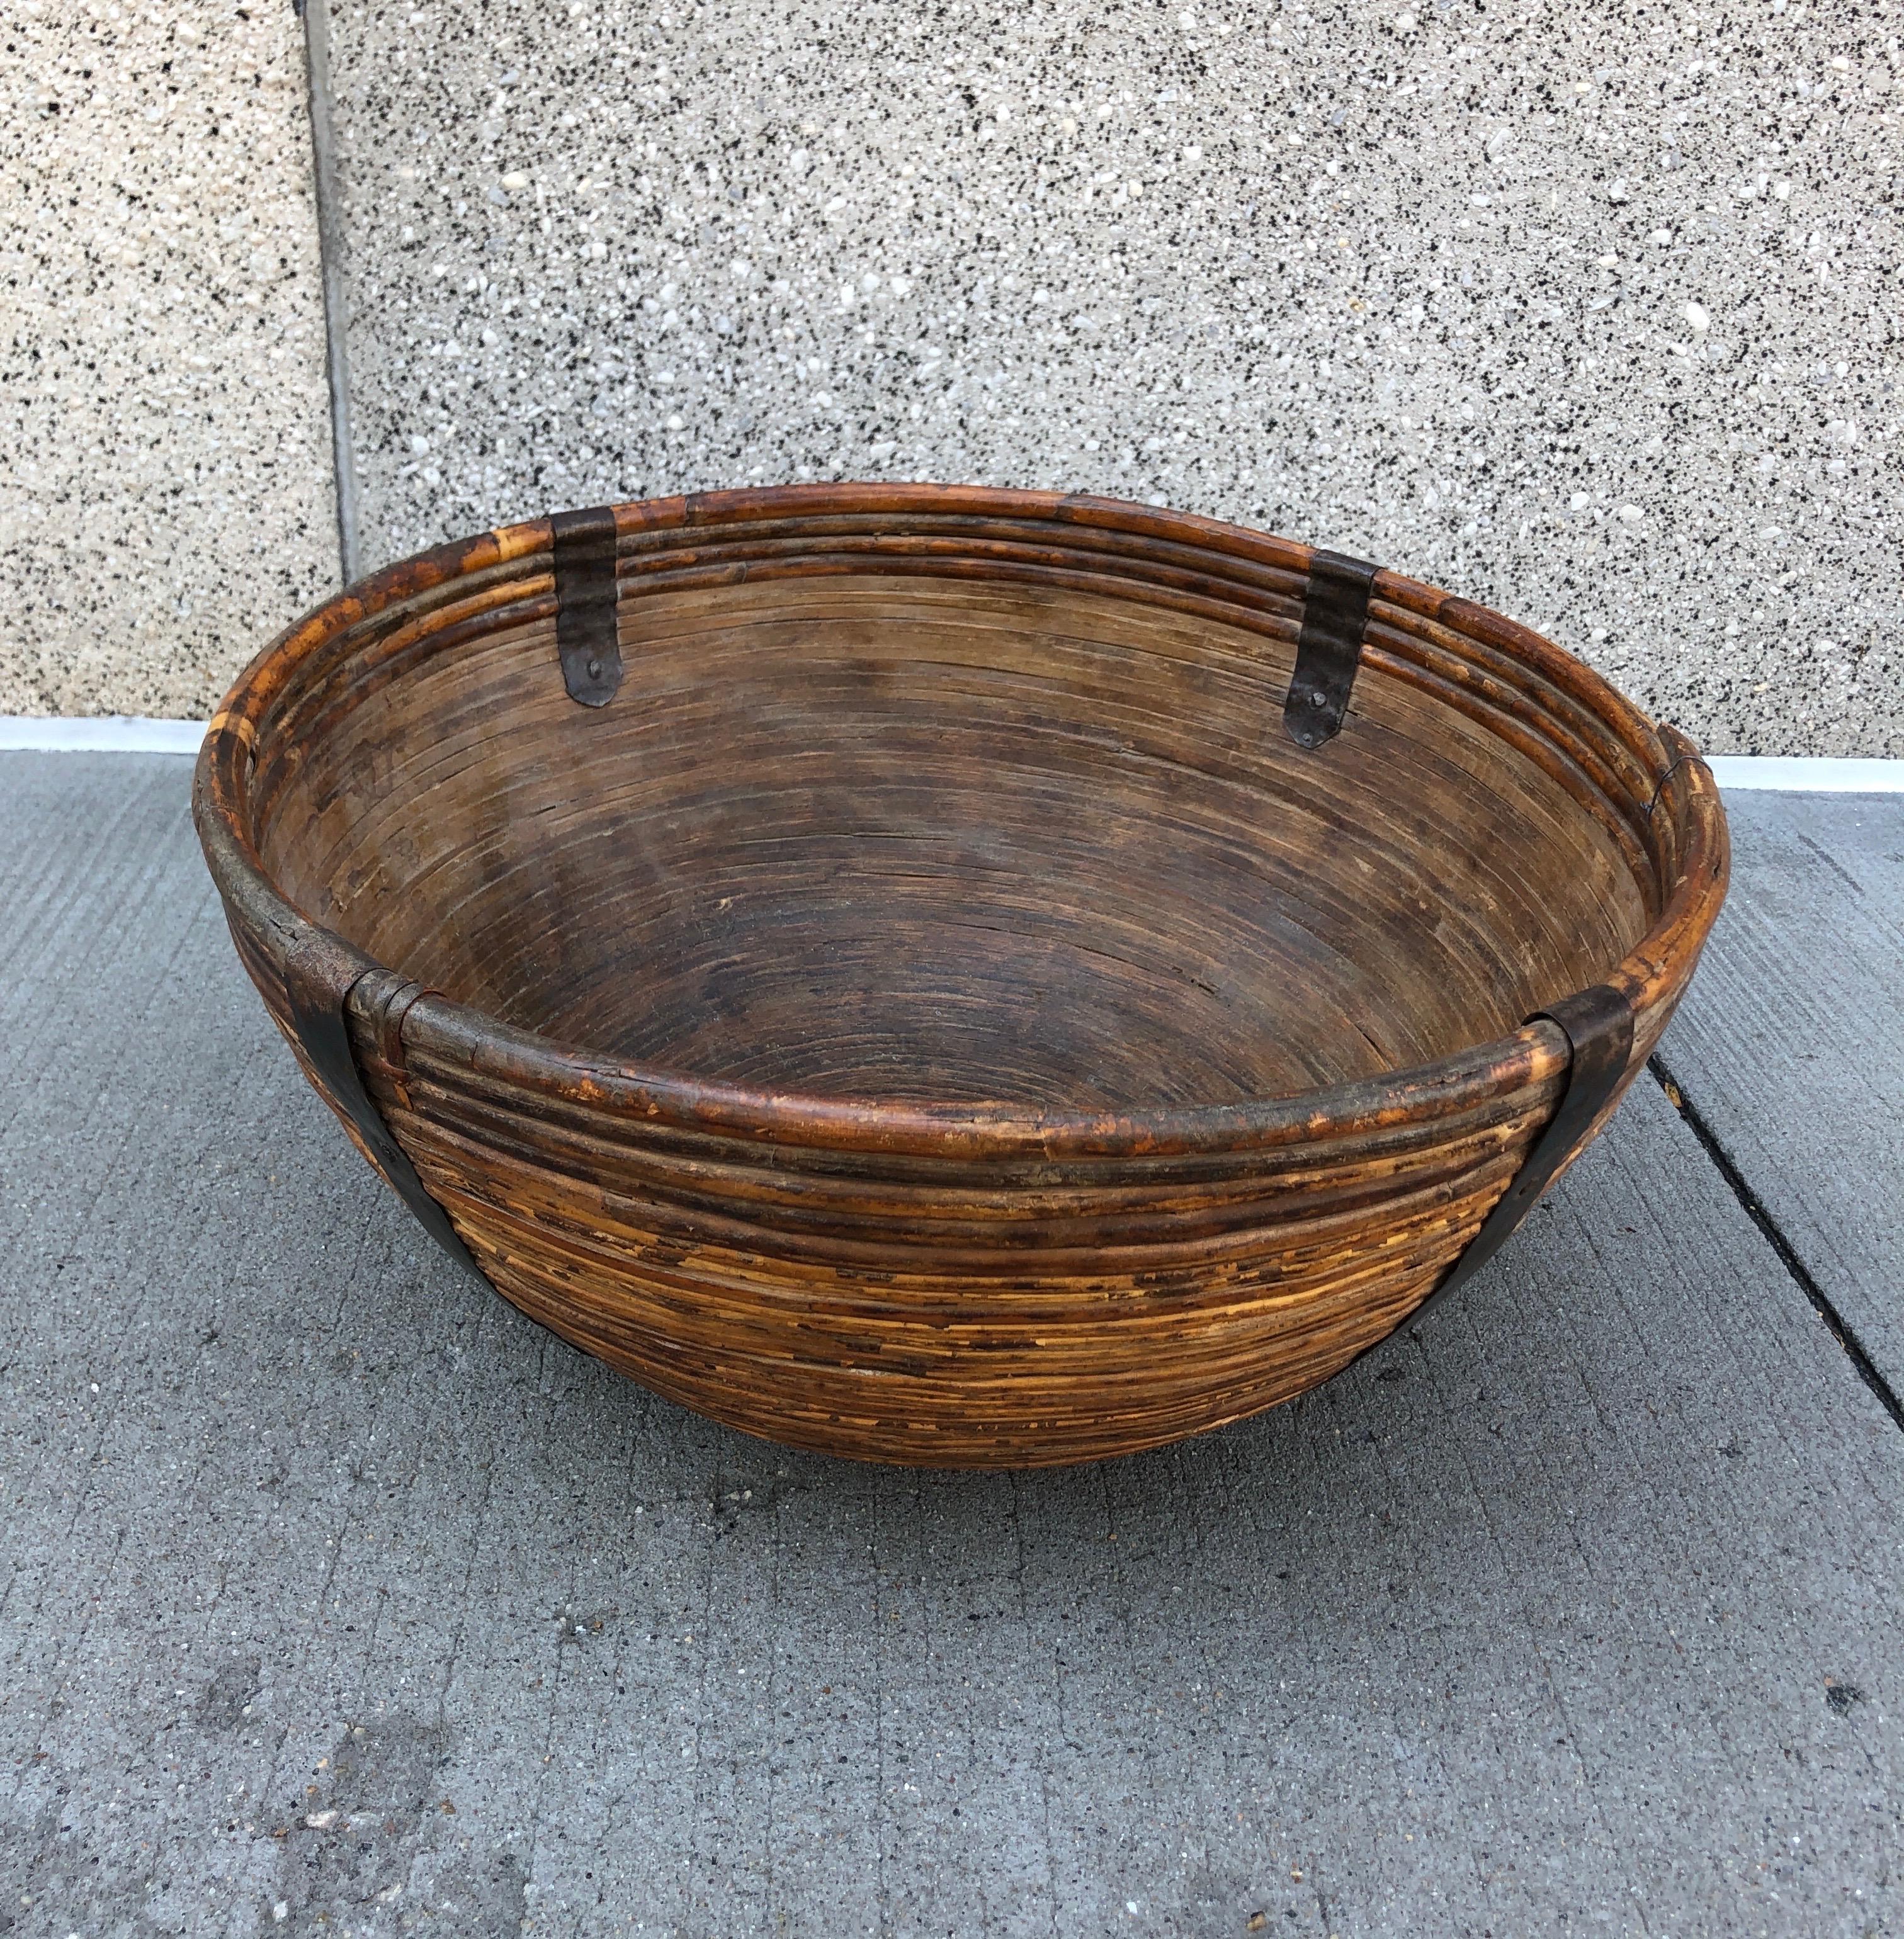 Indonesian Fiber/Wood Bowl with Metal Supports